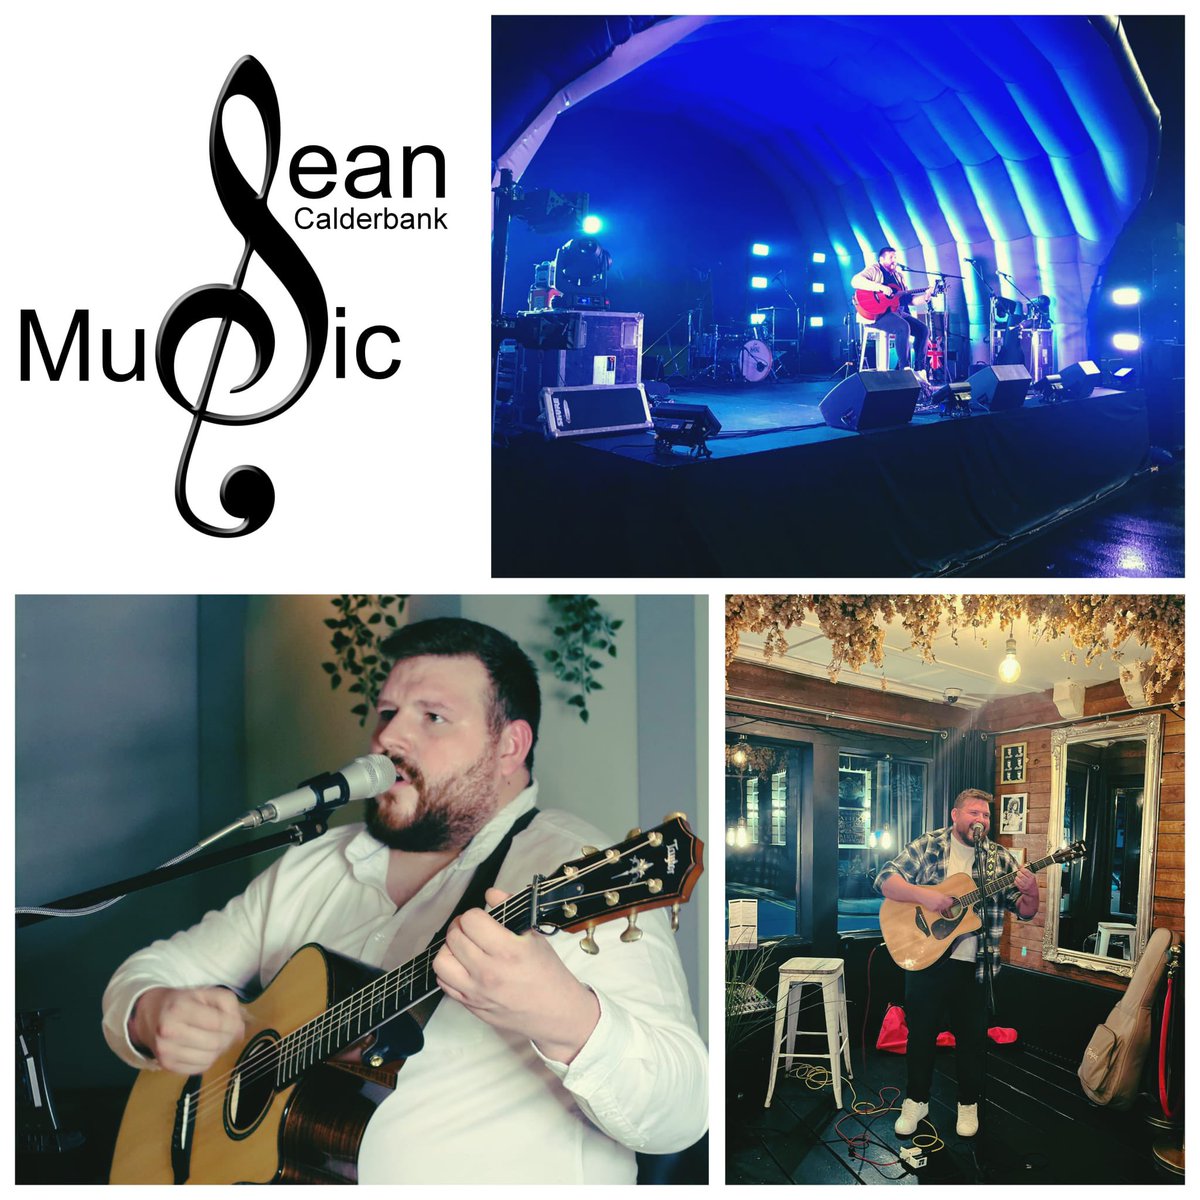 🎸THURSDAY CLUB🎙️ We a proud to present, yet another fantastic debutant, Thursday from 5pm Sean Calderbank🎸 Bring your friends down and enjoy his performance with 10% off your Pints🍻 and wine l🍷and 2 cocktails* for £8🍸🍸as part of our work day wind down 5-7pm Mon-Fri